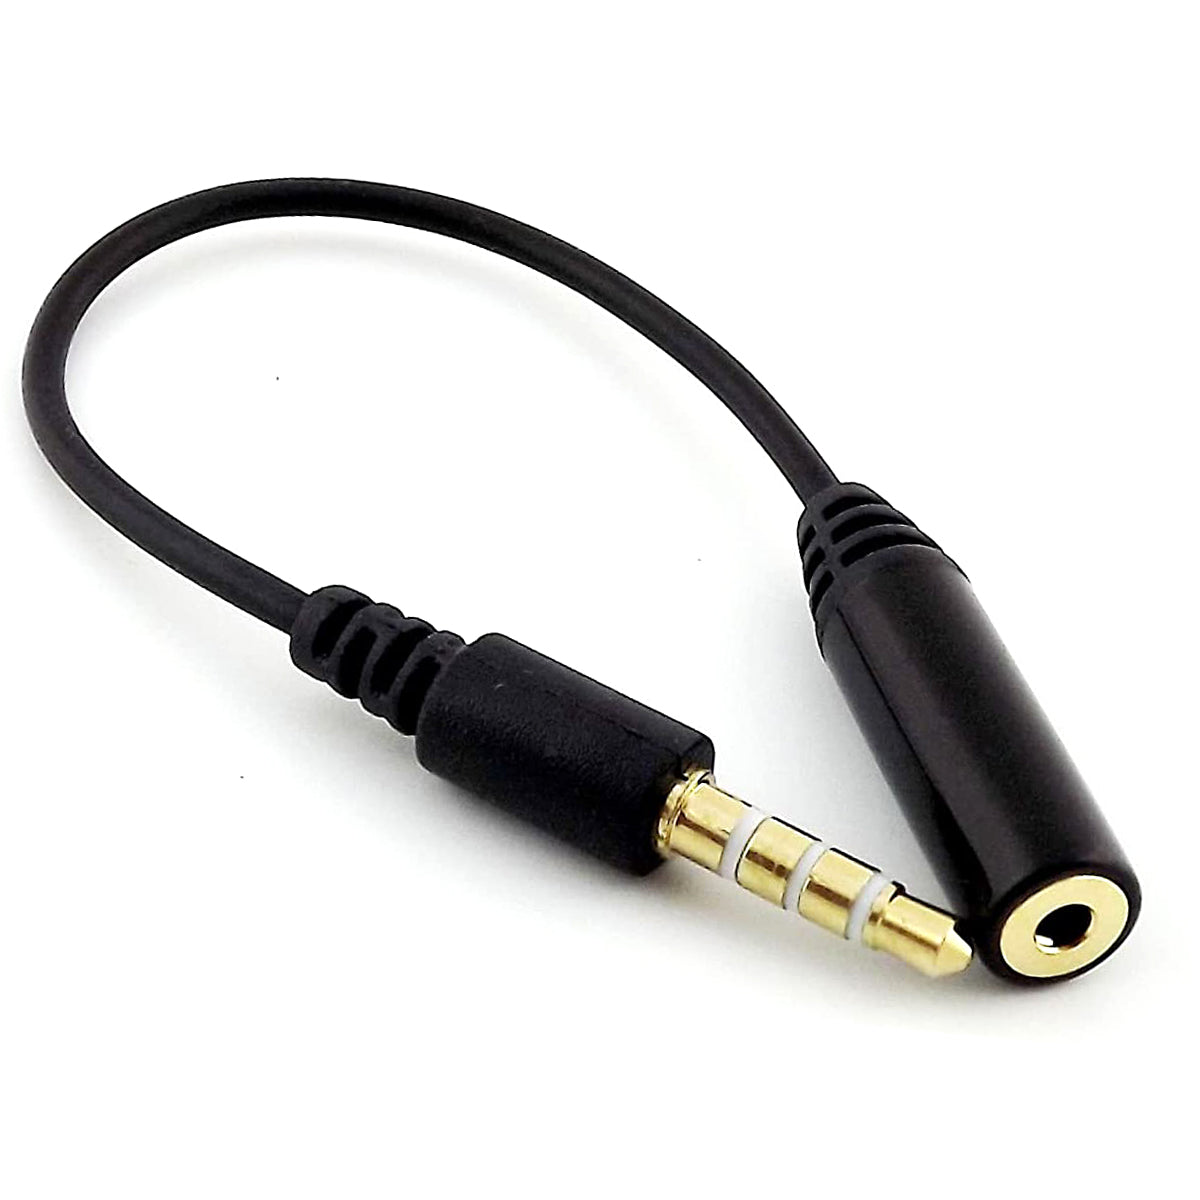 An iPad stylus that connects to the audio jack? 